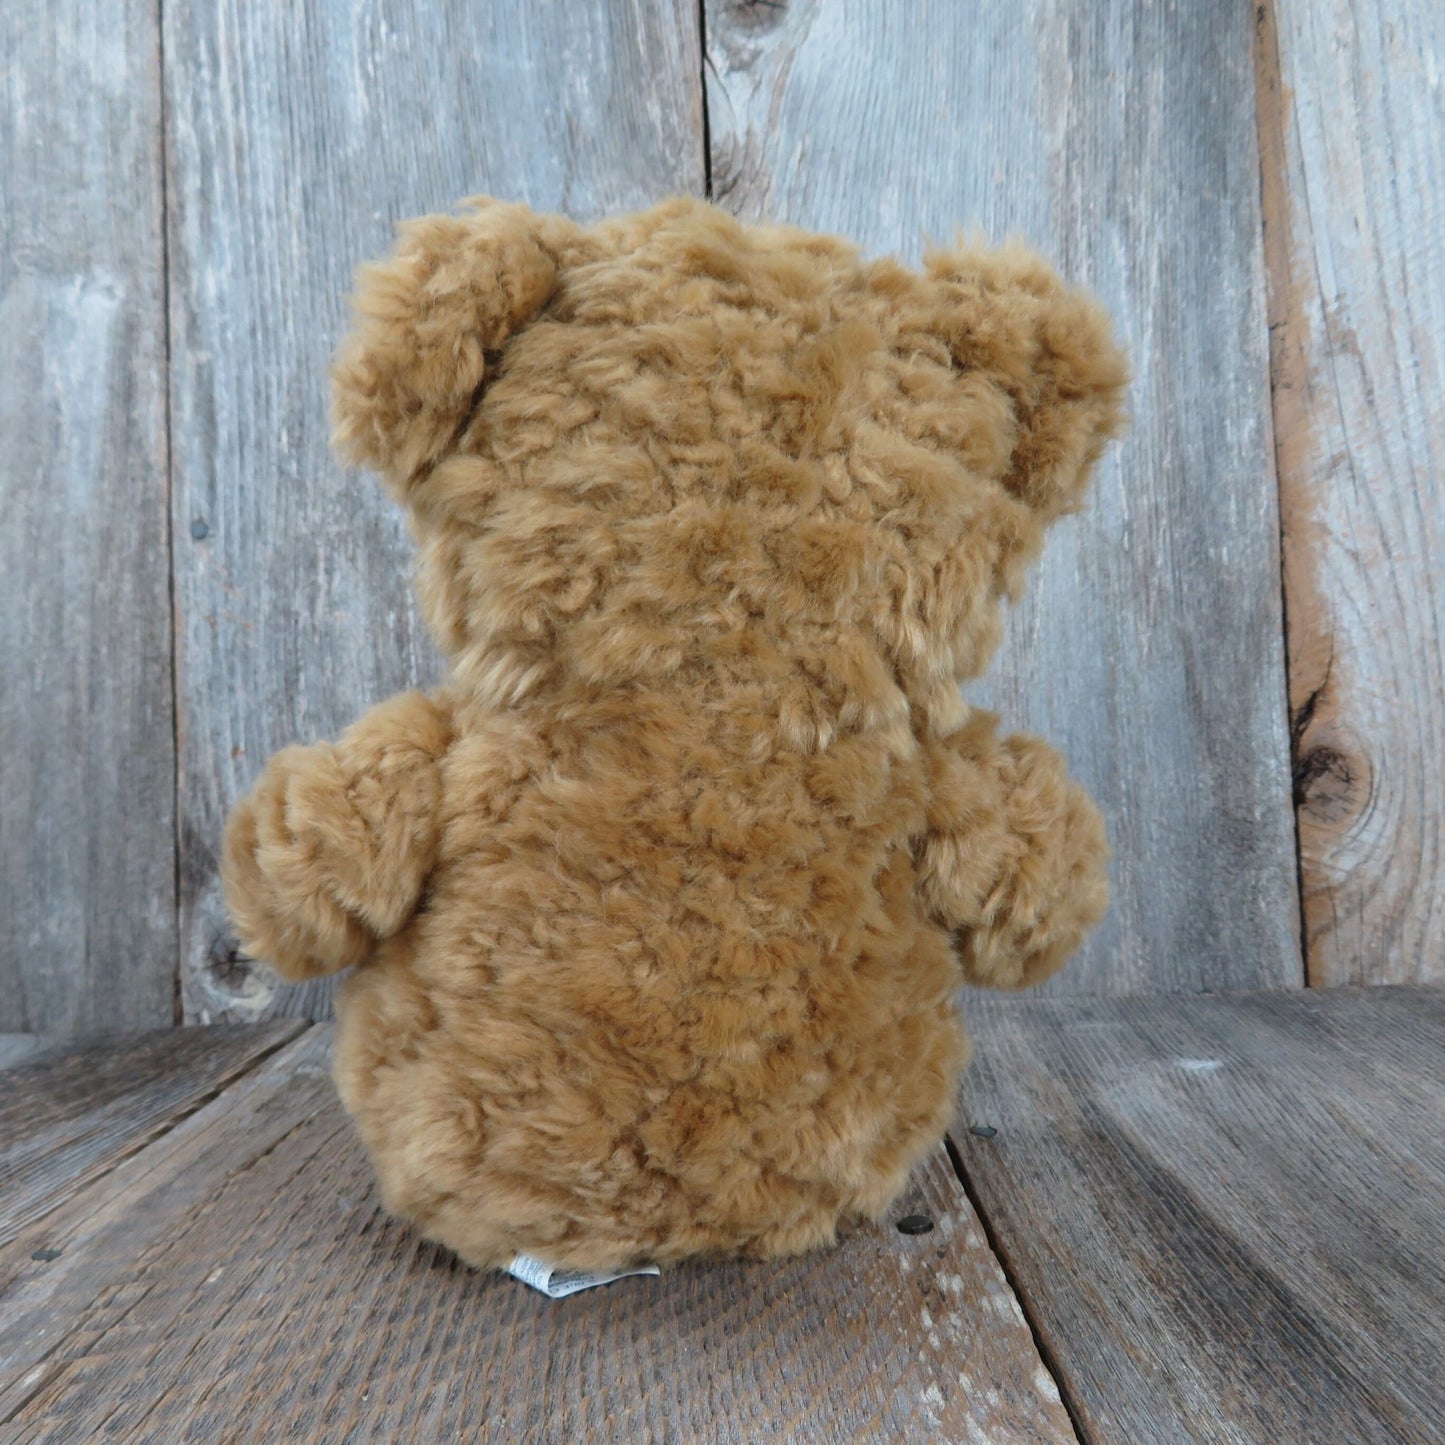 Teddy Bear with Red Heart and Flocked Nose Brown Plush Shaggy DGE Corp